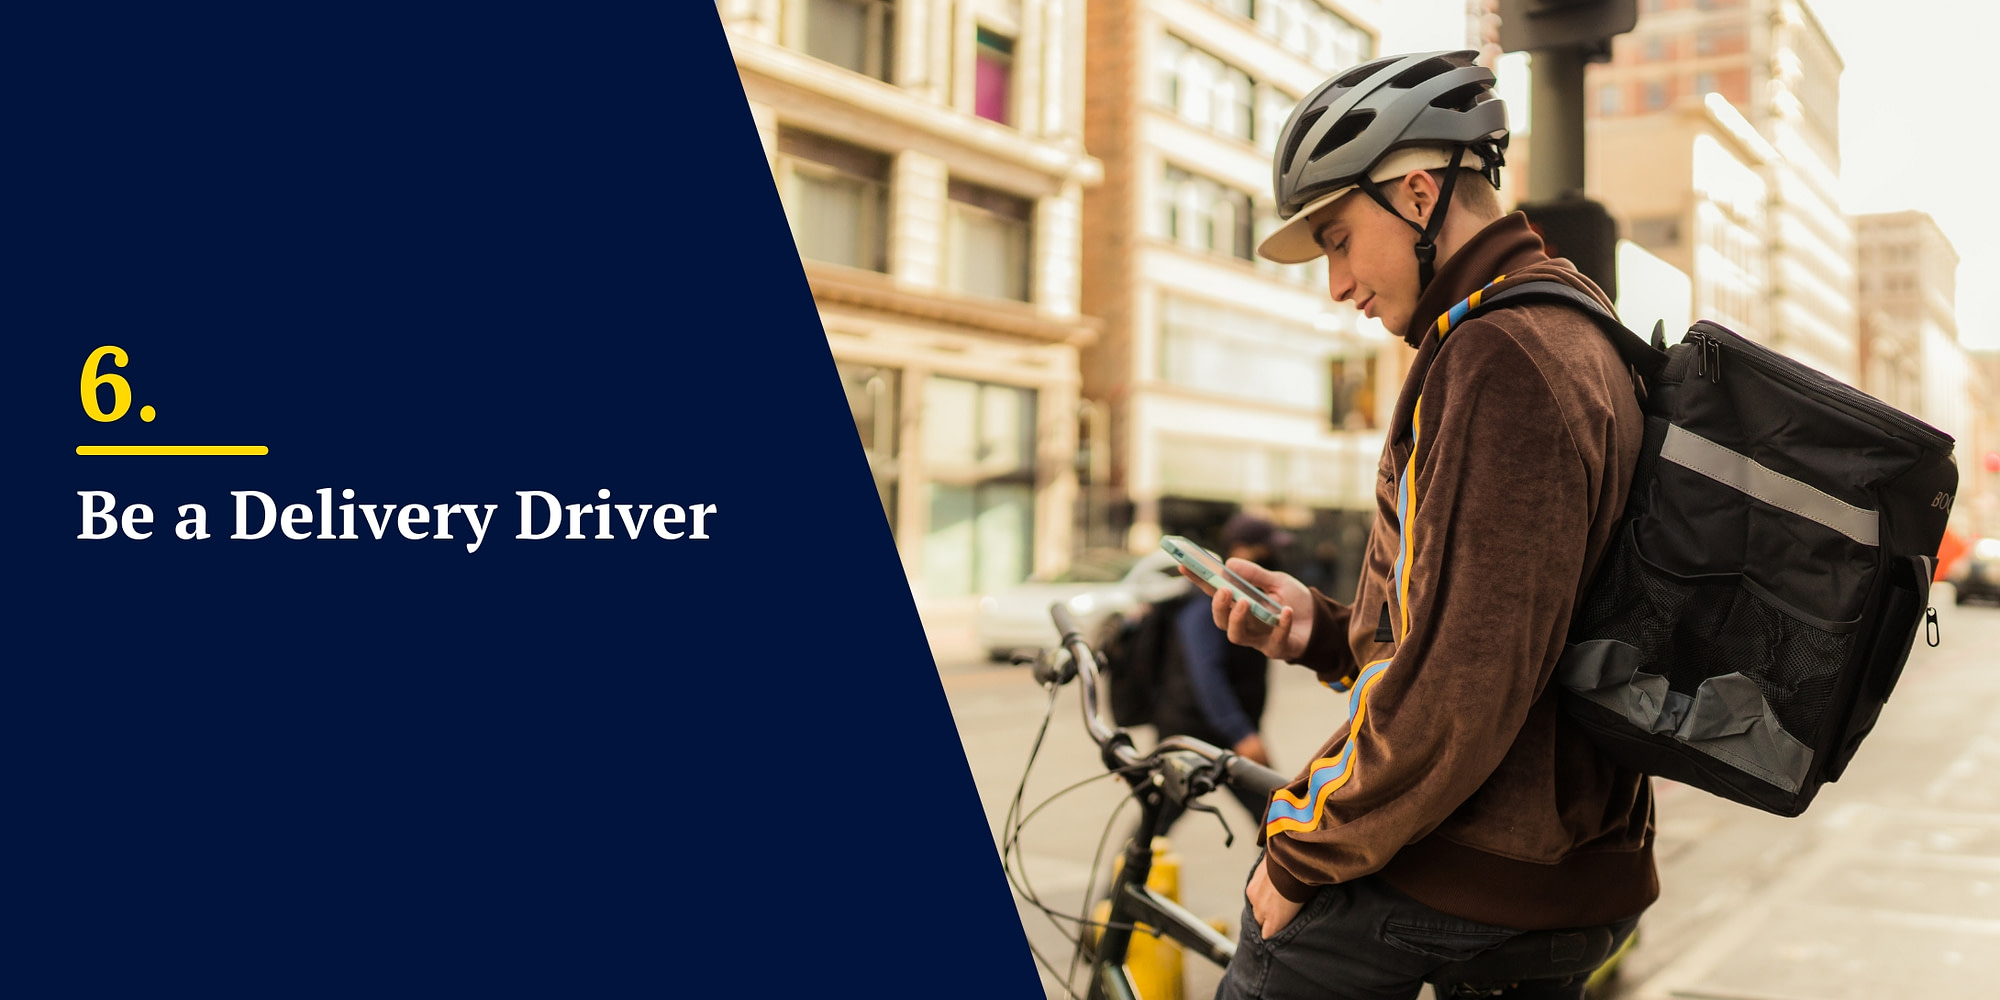 Be a Delivery Driver